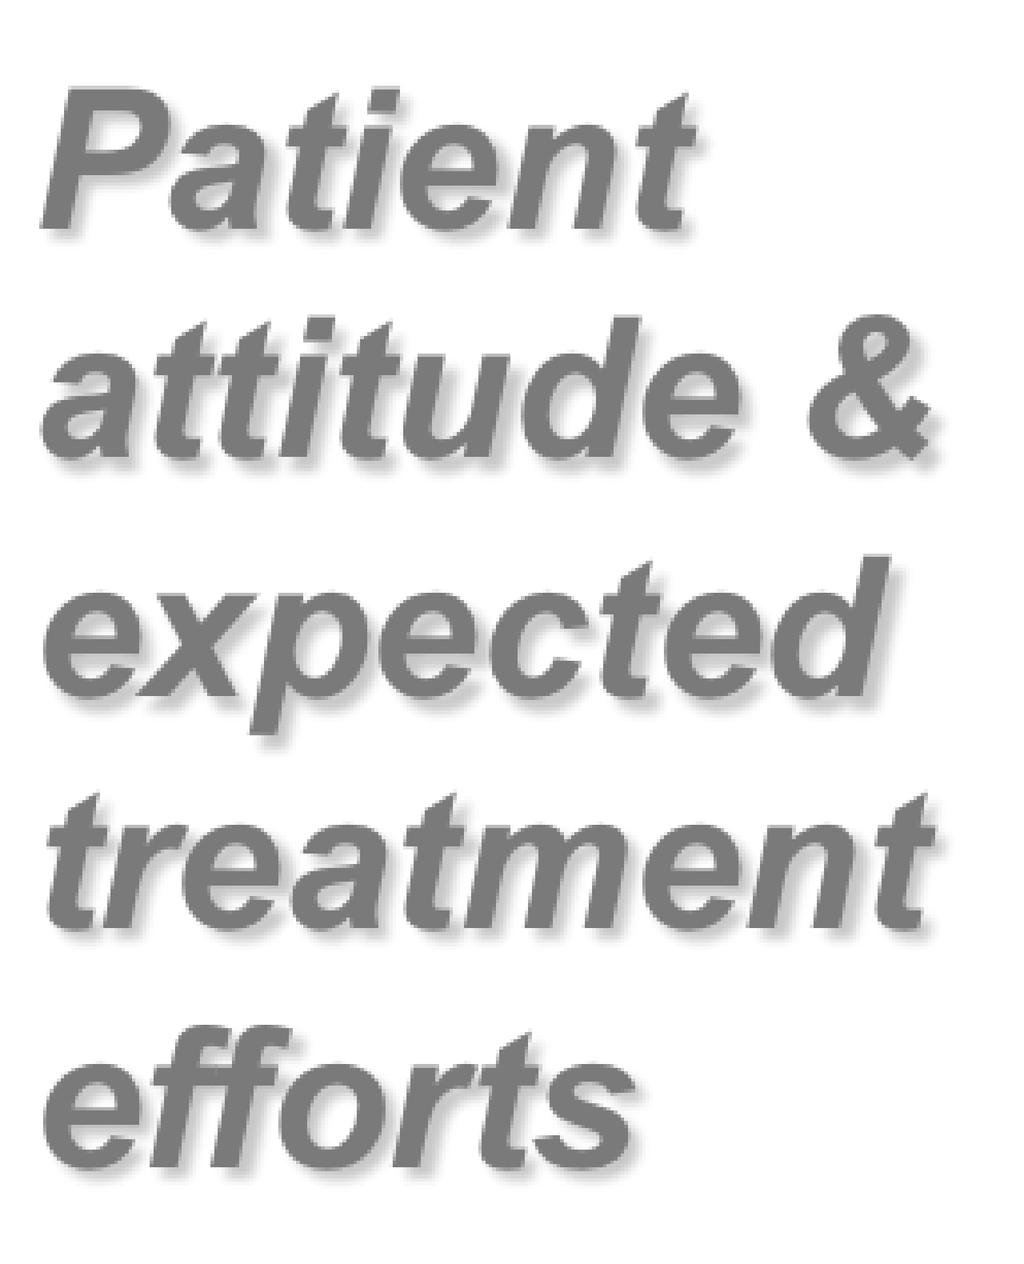 Approach to the Management of Hyperglycemia me stringent Patient attitude & expected treatment effts HbA1c 7% Highly motivated, adherent, excellent self-care capacities less stringent Less motivated,